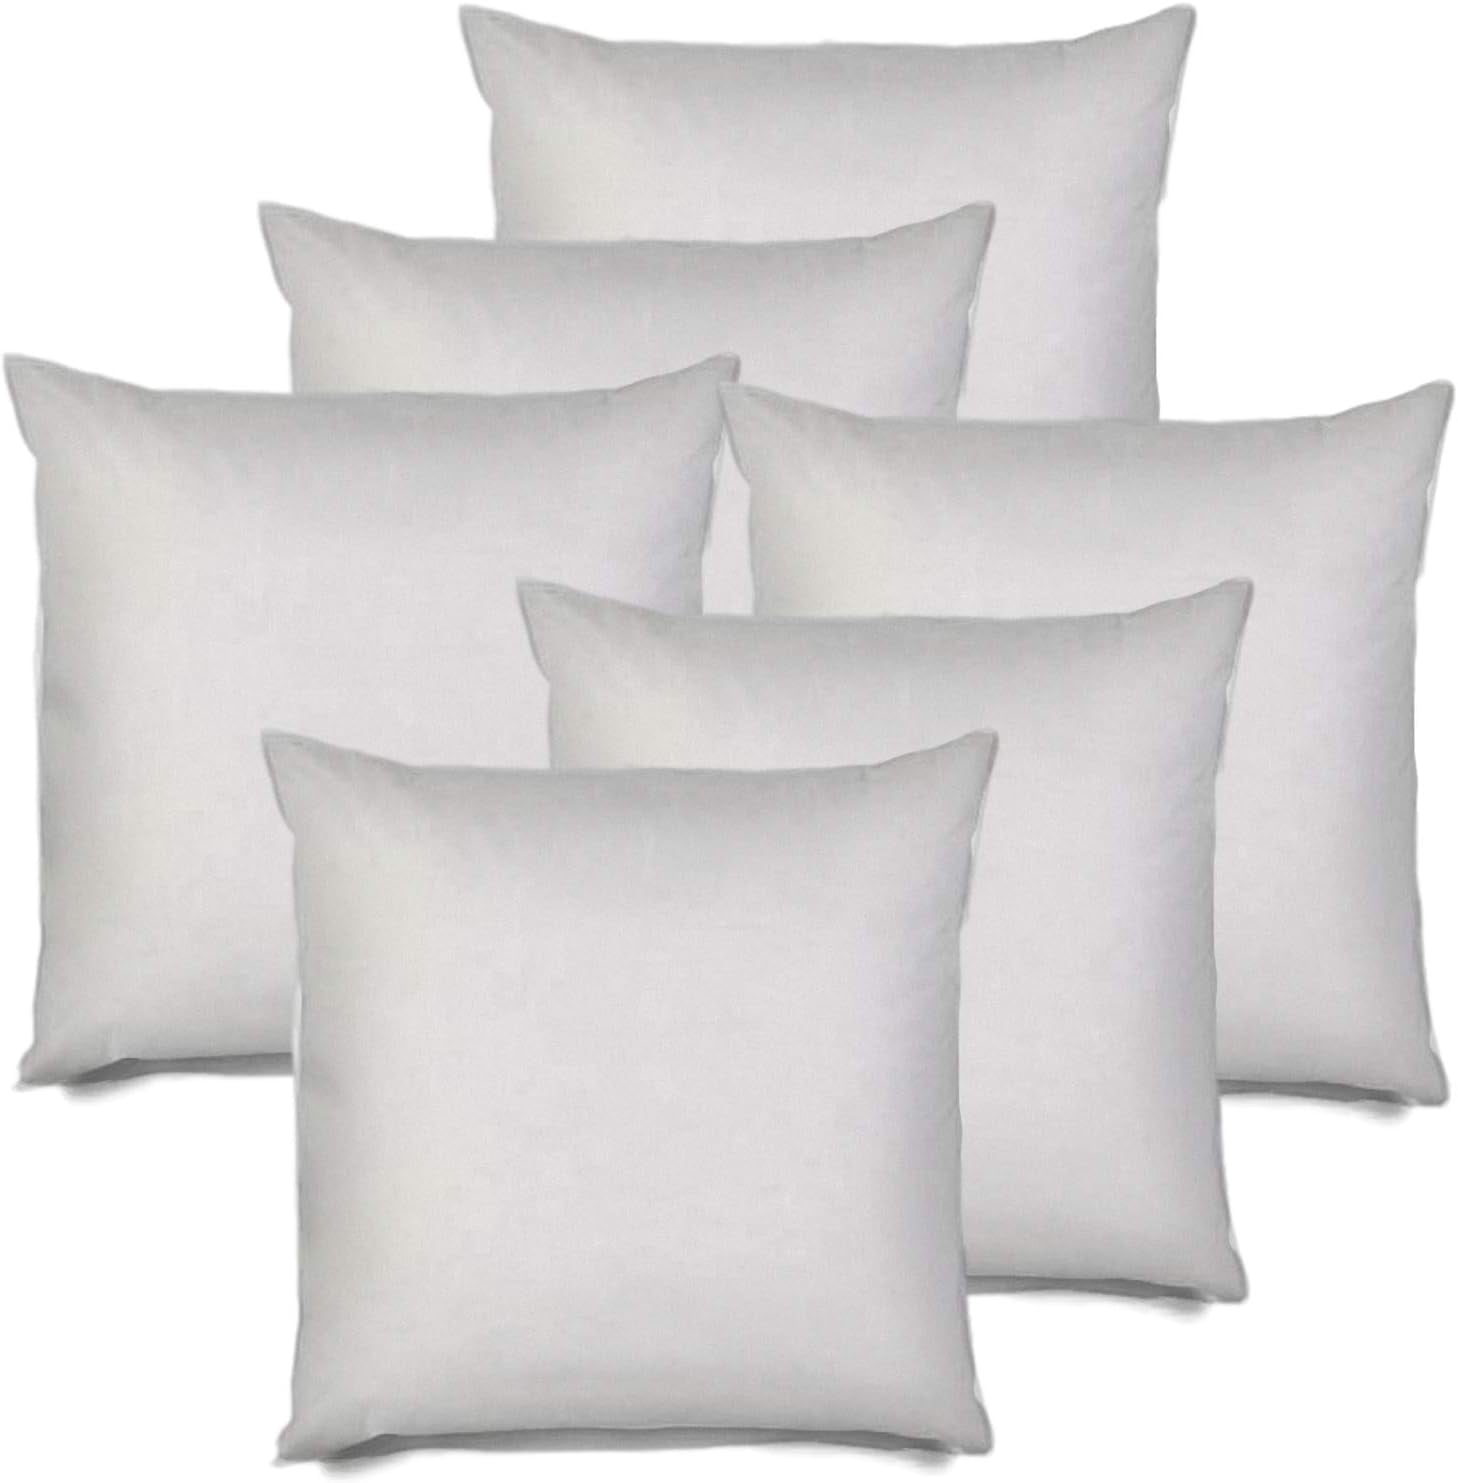 6 Pack Pillow Insert 32X32 Hypoallergenic Square Form Sham Stuffer Standard  White Polyester Decorative Euro Throw Pillow Inserts For Sofa Bed - Made In  (Set Of 6) - Machine Washable And Dry 